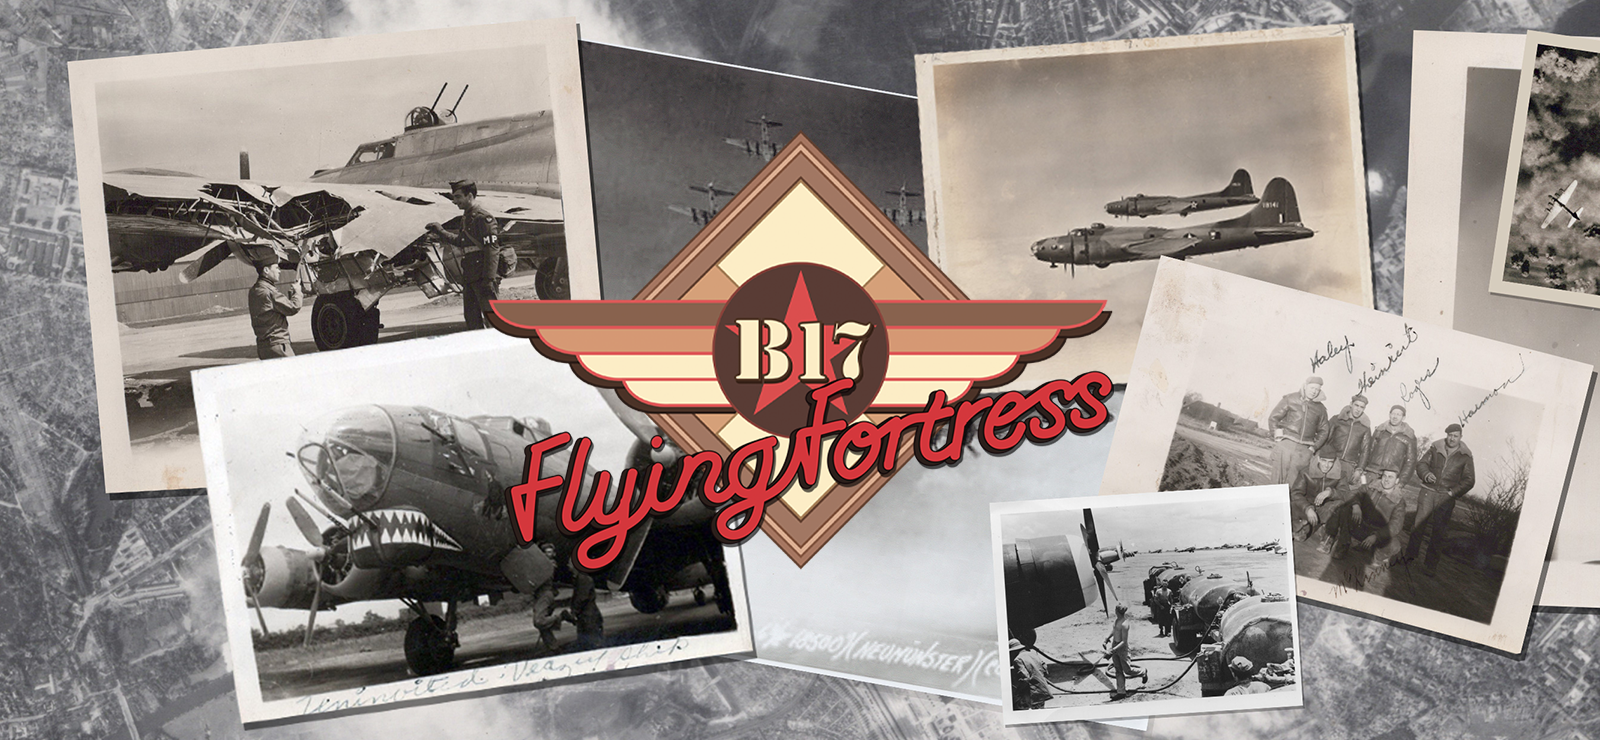 B-17 Flying Fortress: Bombers In Action